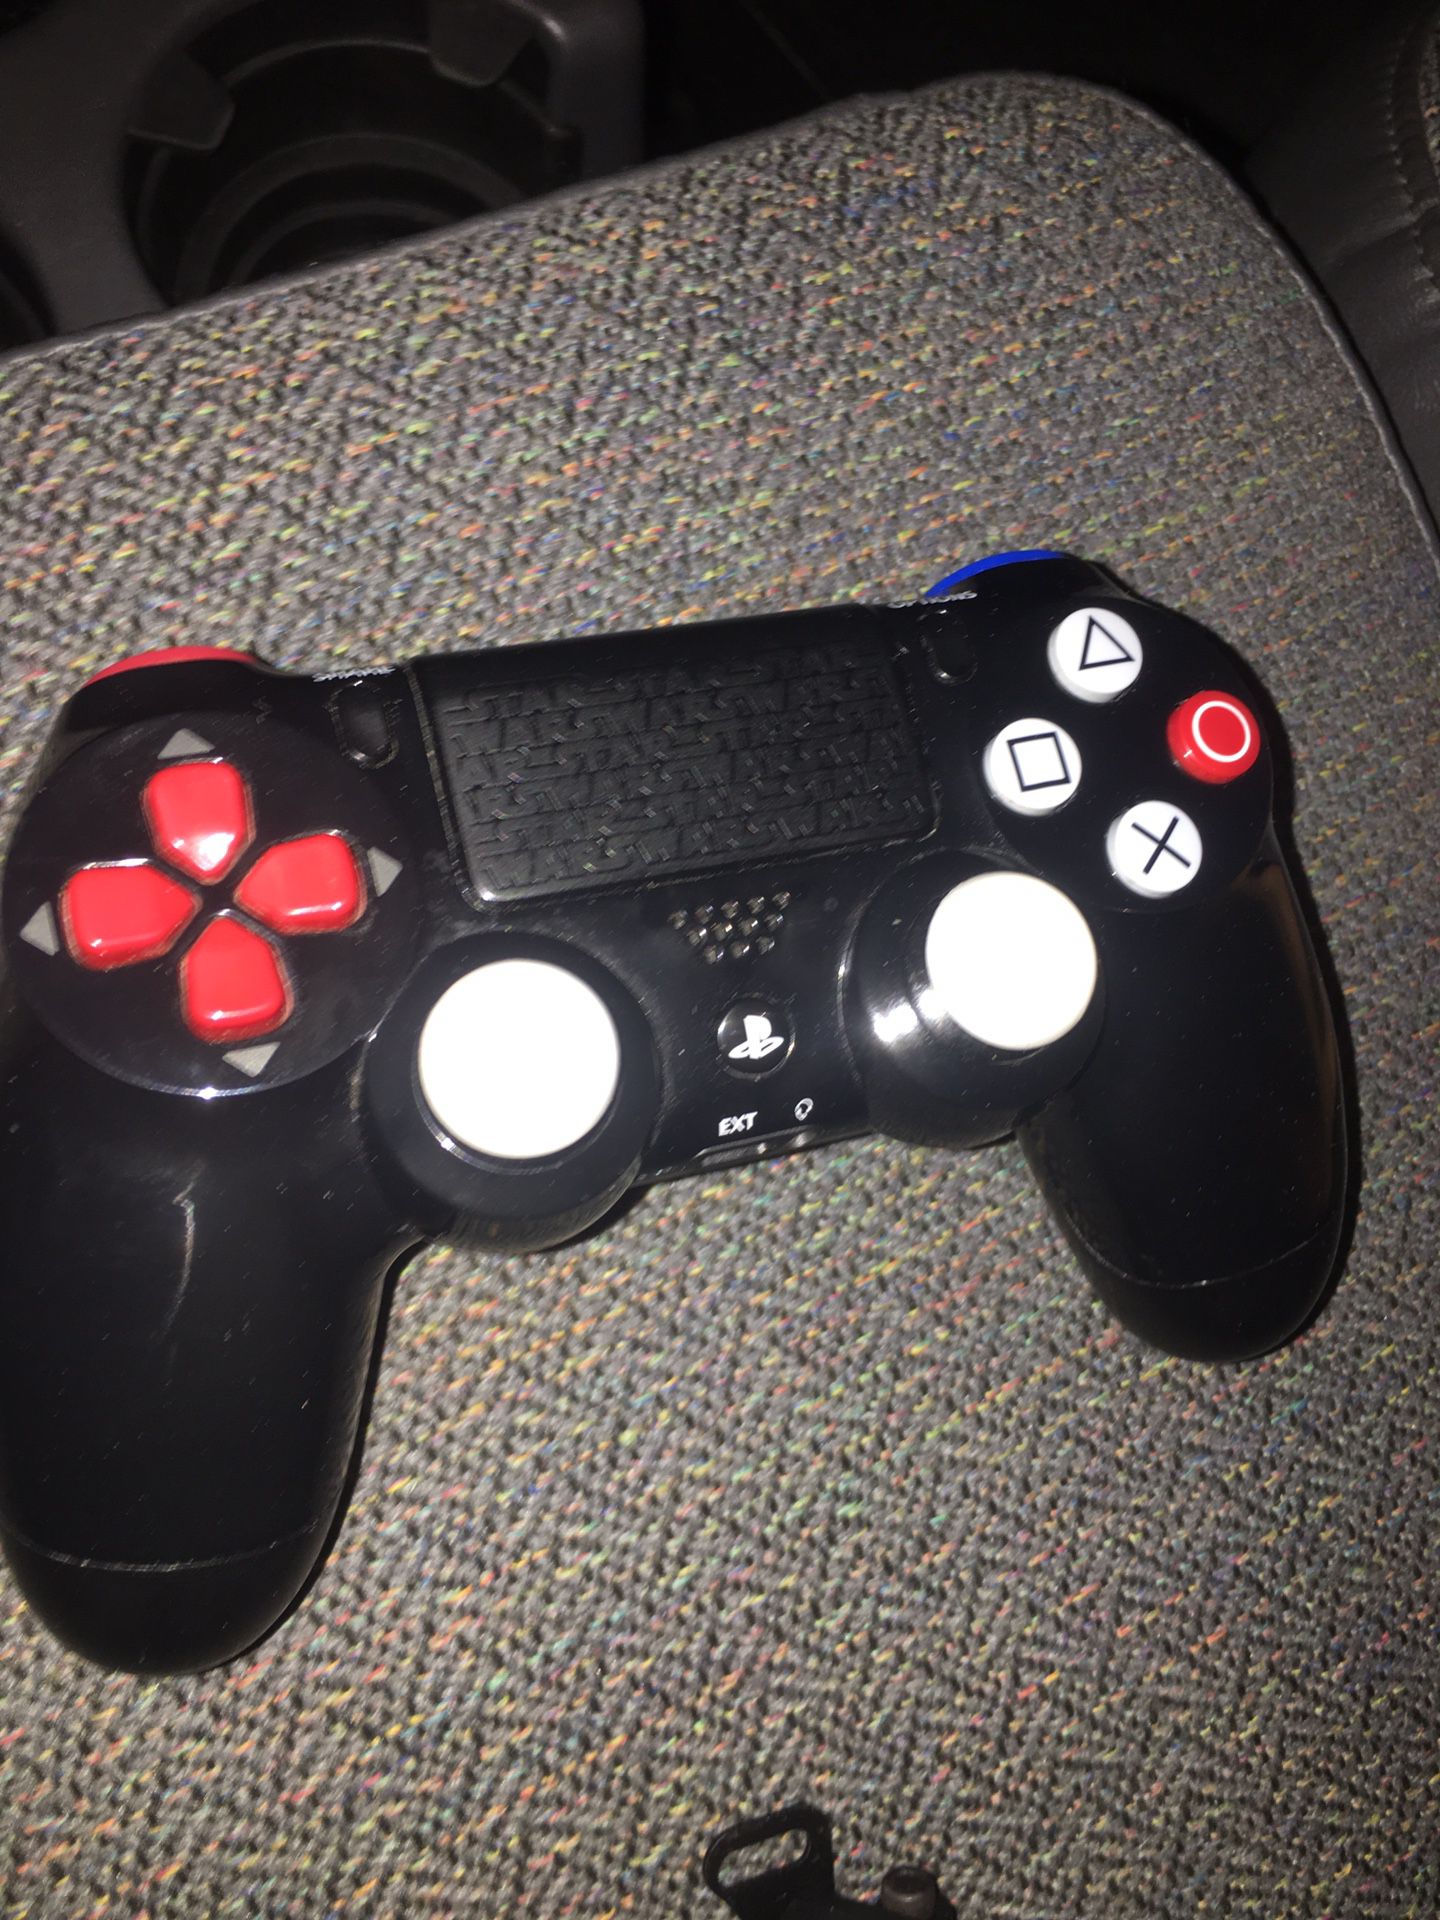 Star Wars edition ps4 controller